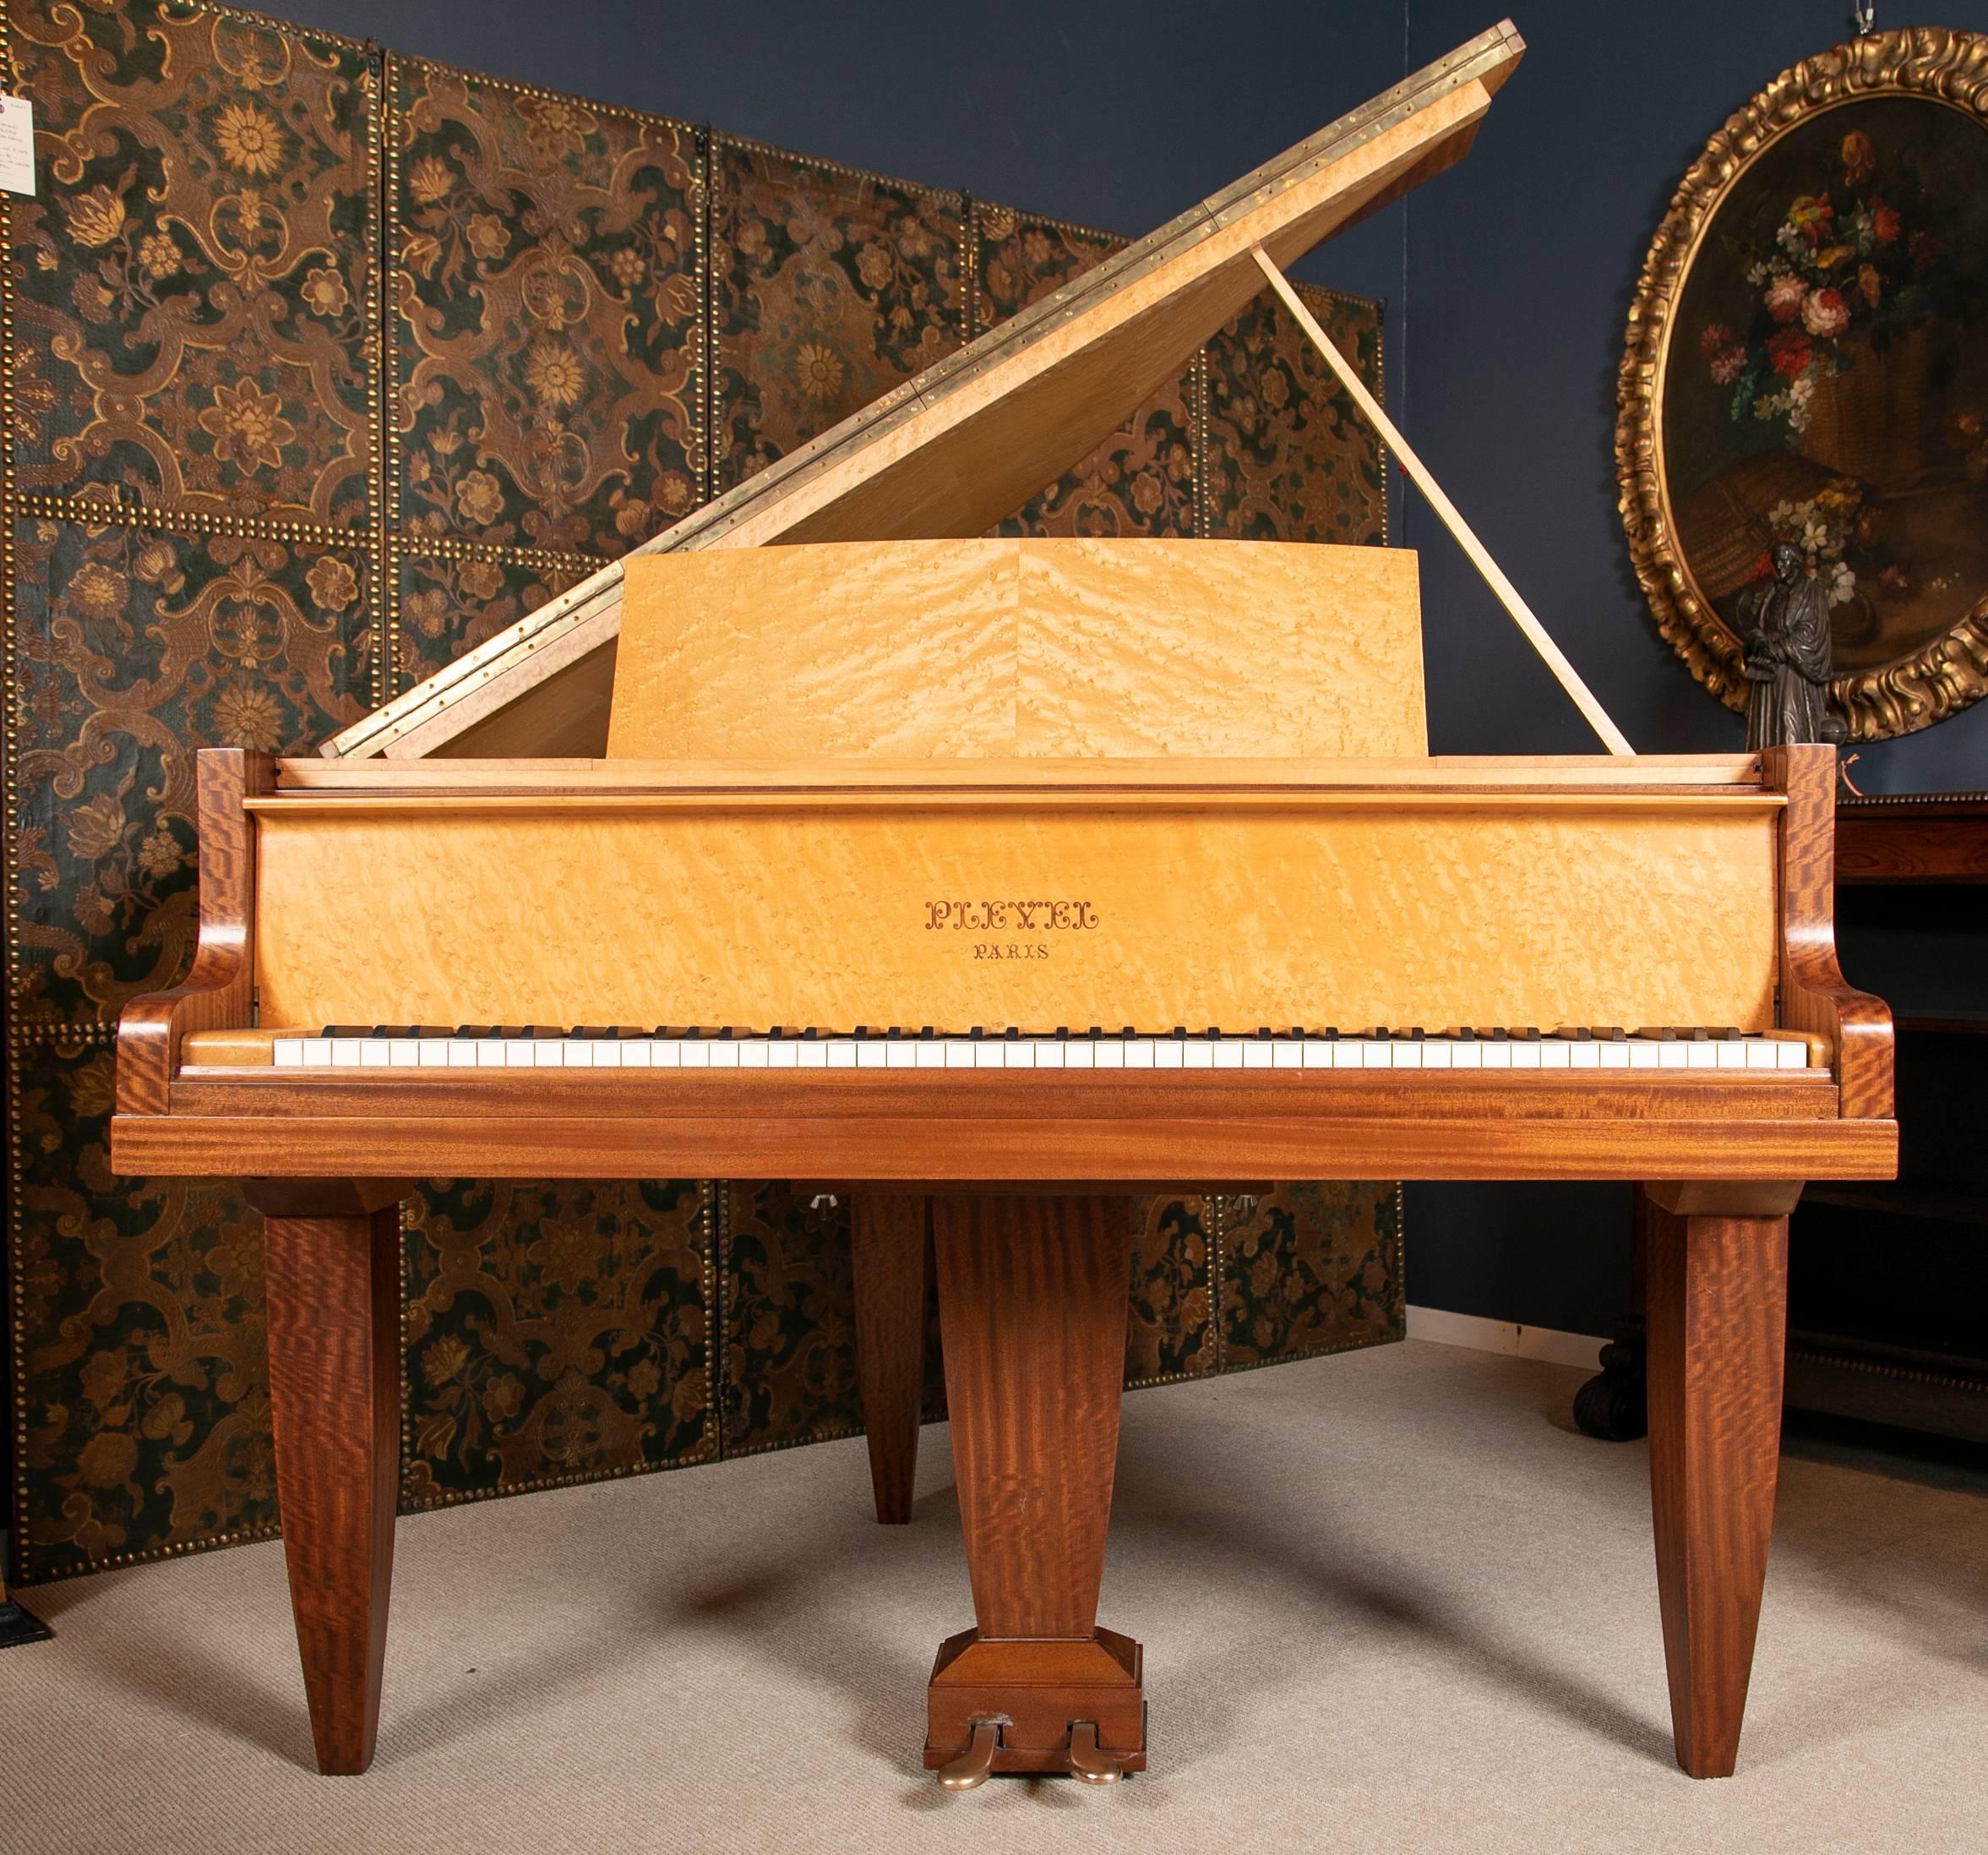 Art Deco baby grand piano in gorgeous mahogany and bird's-eye maple veneers. This is a unique, petite, apartment size baby grand piano in the 1939 era of superior piano manufacturing. All original, and in excellent structural condition. Mechanically